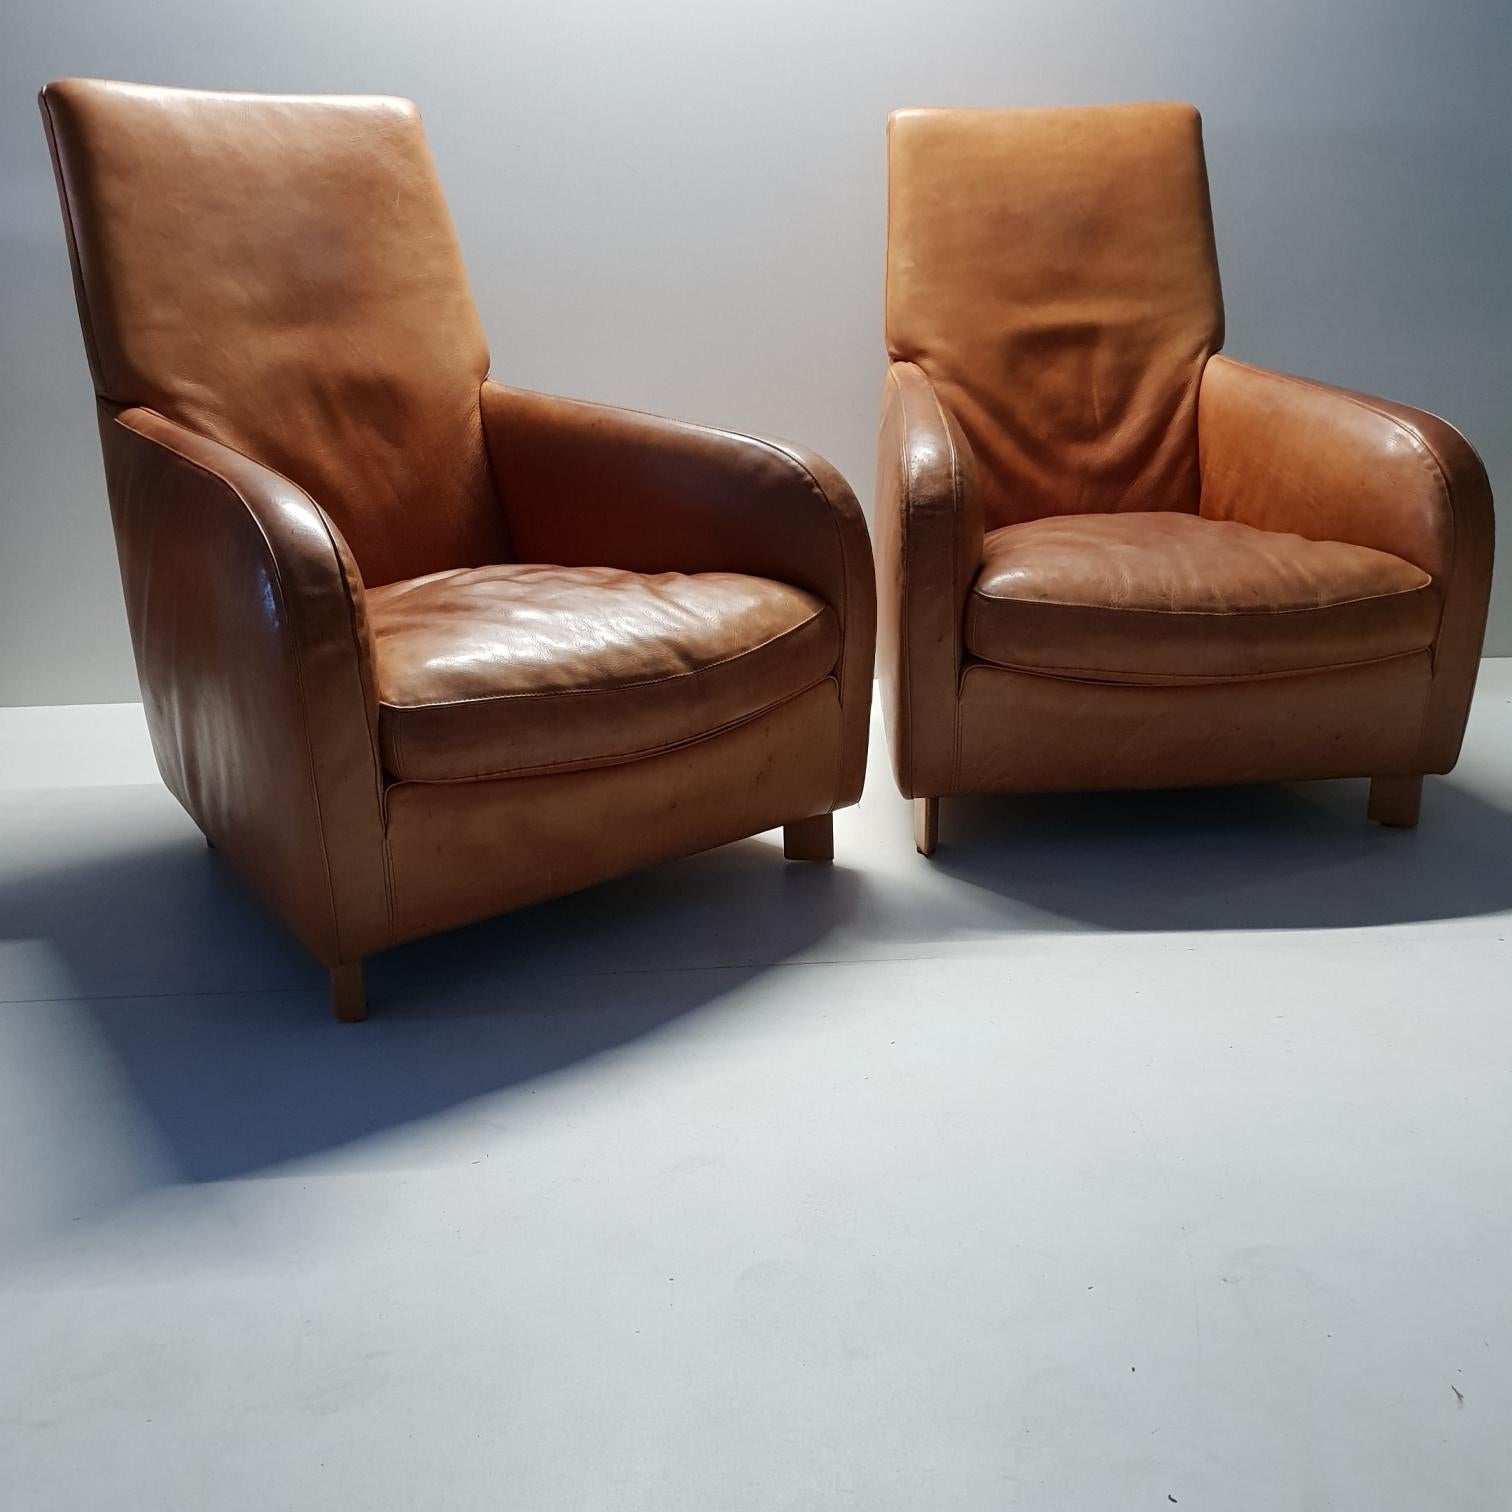 Pair of high quality cognac leather lounge chairs by Molinari (marked), 1990s.
Very thick leather with a nice patina.